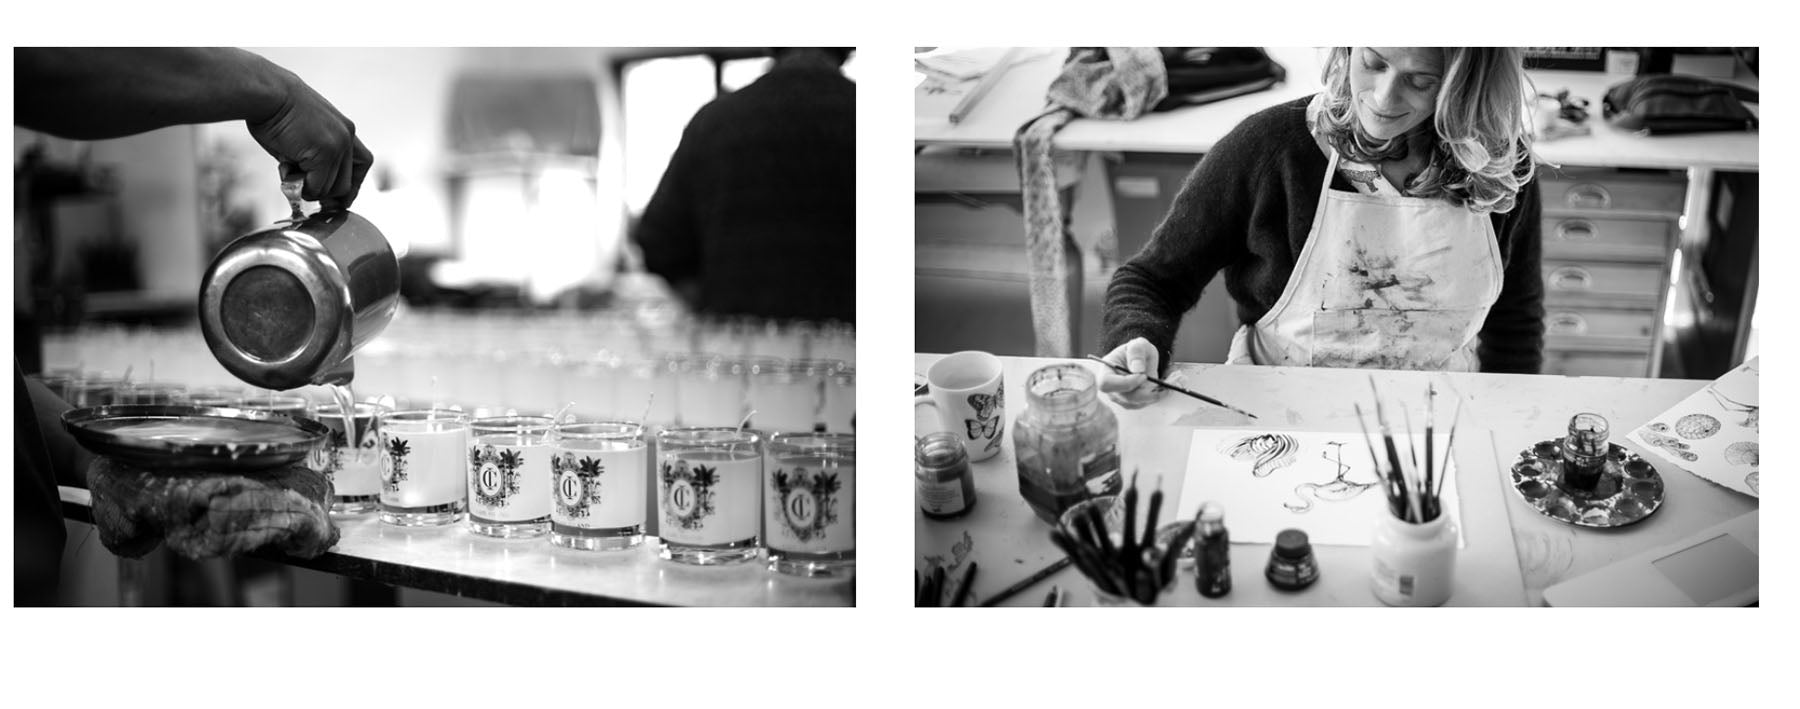 The Cape Island team creating their products. Cape Island luxury candles, soap products and home fragrances are available at Sarza home goods and furniture store in Rye New York